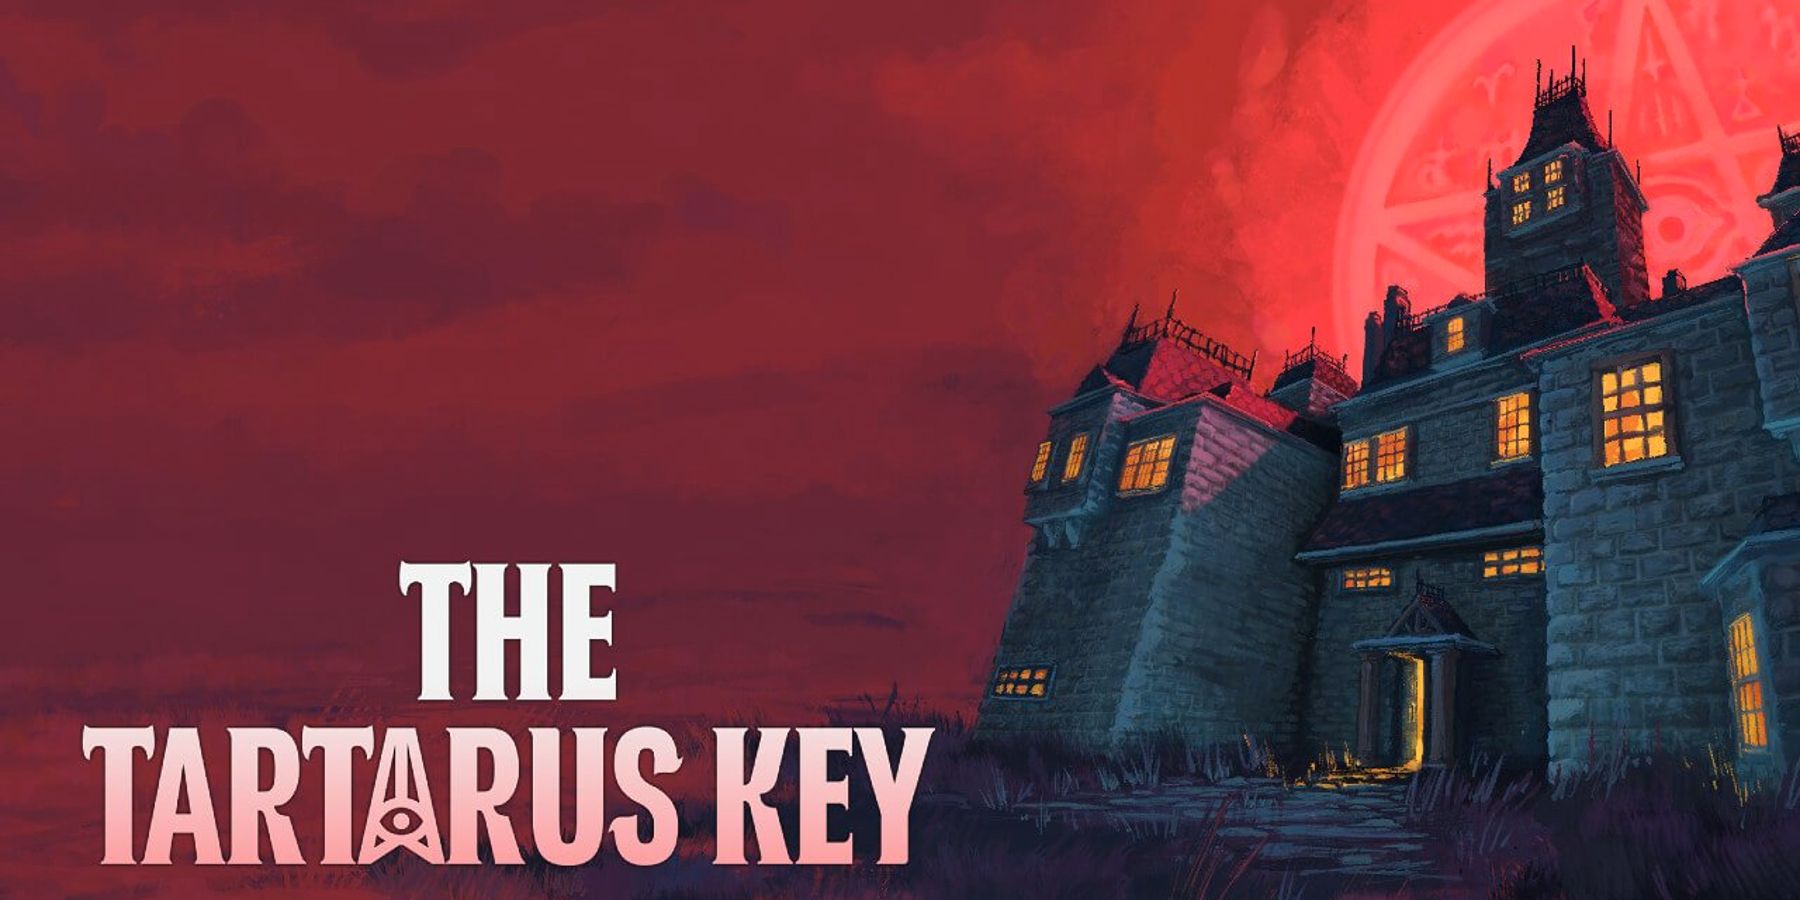 PS1 Style Horror Game The Tartarus Key annonceret til Nintendo Switch